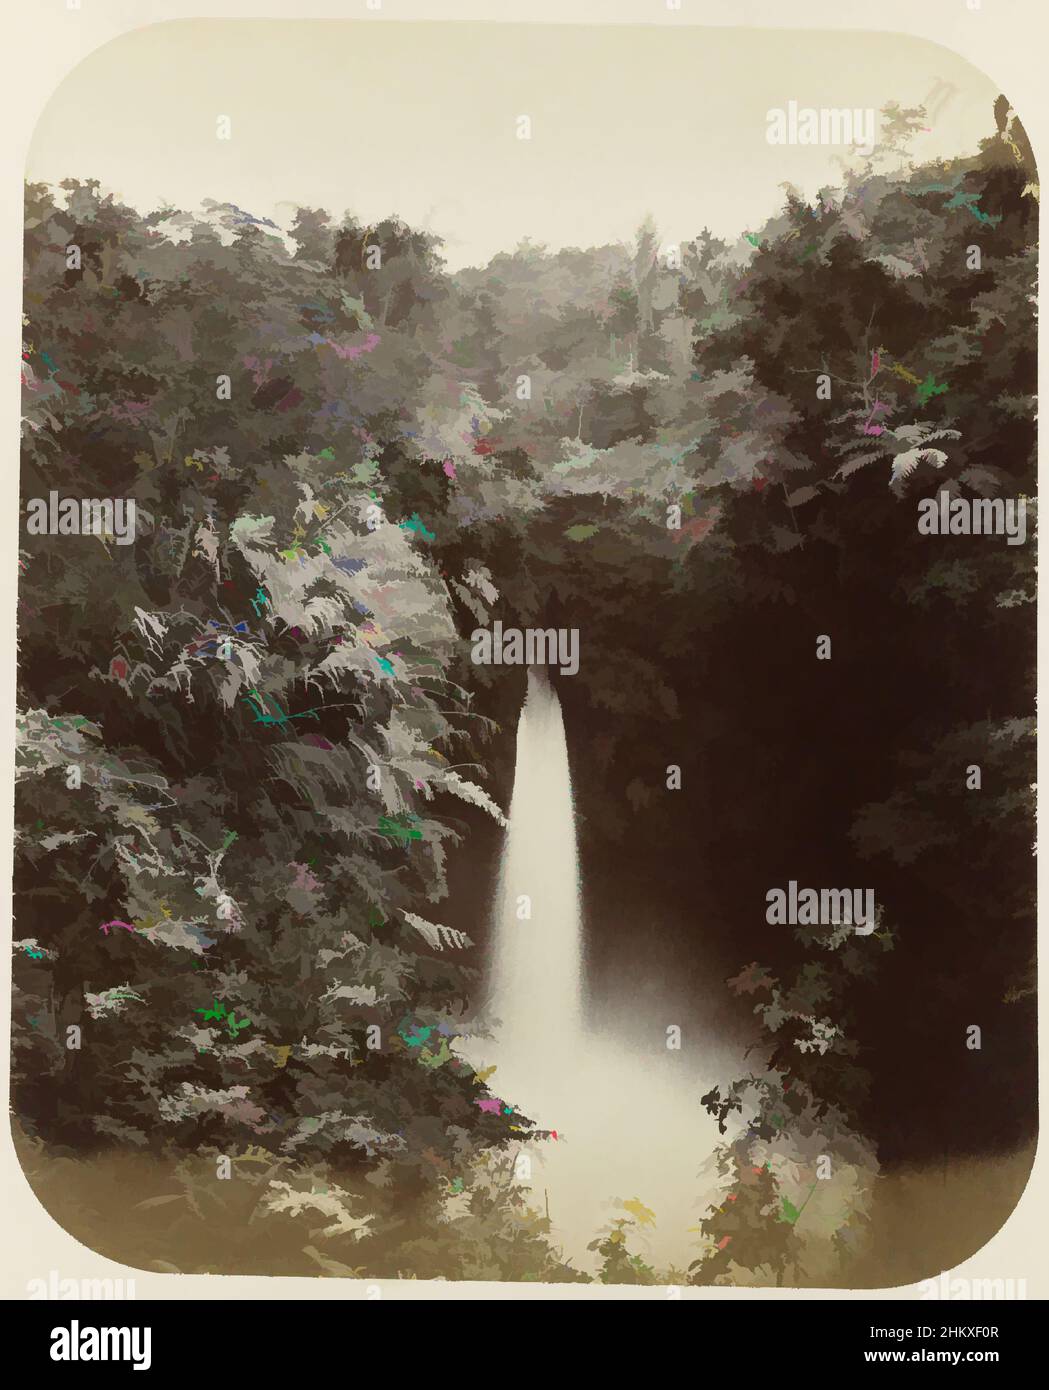 Art inspired by Waterfall, Waterfall in the forest. The Dago waterfall in the Tjikapoendoeng near Bandung or the waterfall of Tondano in the Minahasa. Pasted photo in the photo album titled: Faces of Java., Woodbury & Page, Celebes, 1870 - 1880, photographic support, albumen print, Classic works modernized by Artotop with a splash of modernity. Shapes, color and value, eye-catching visual impact on art. Emotions through freedom of artworks in a contemporary way. A timeless message pursuing a wildly creative new direction. Artists turning to the digital medium and creating the Artotop NFT Stock Photo